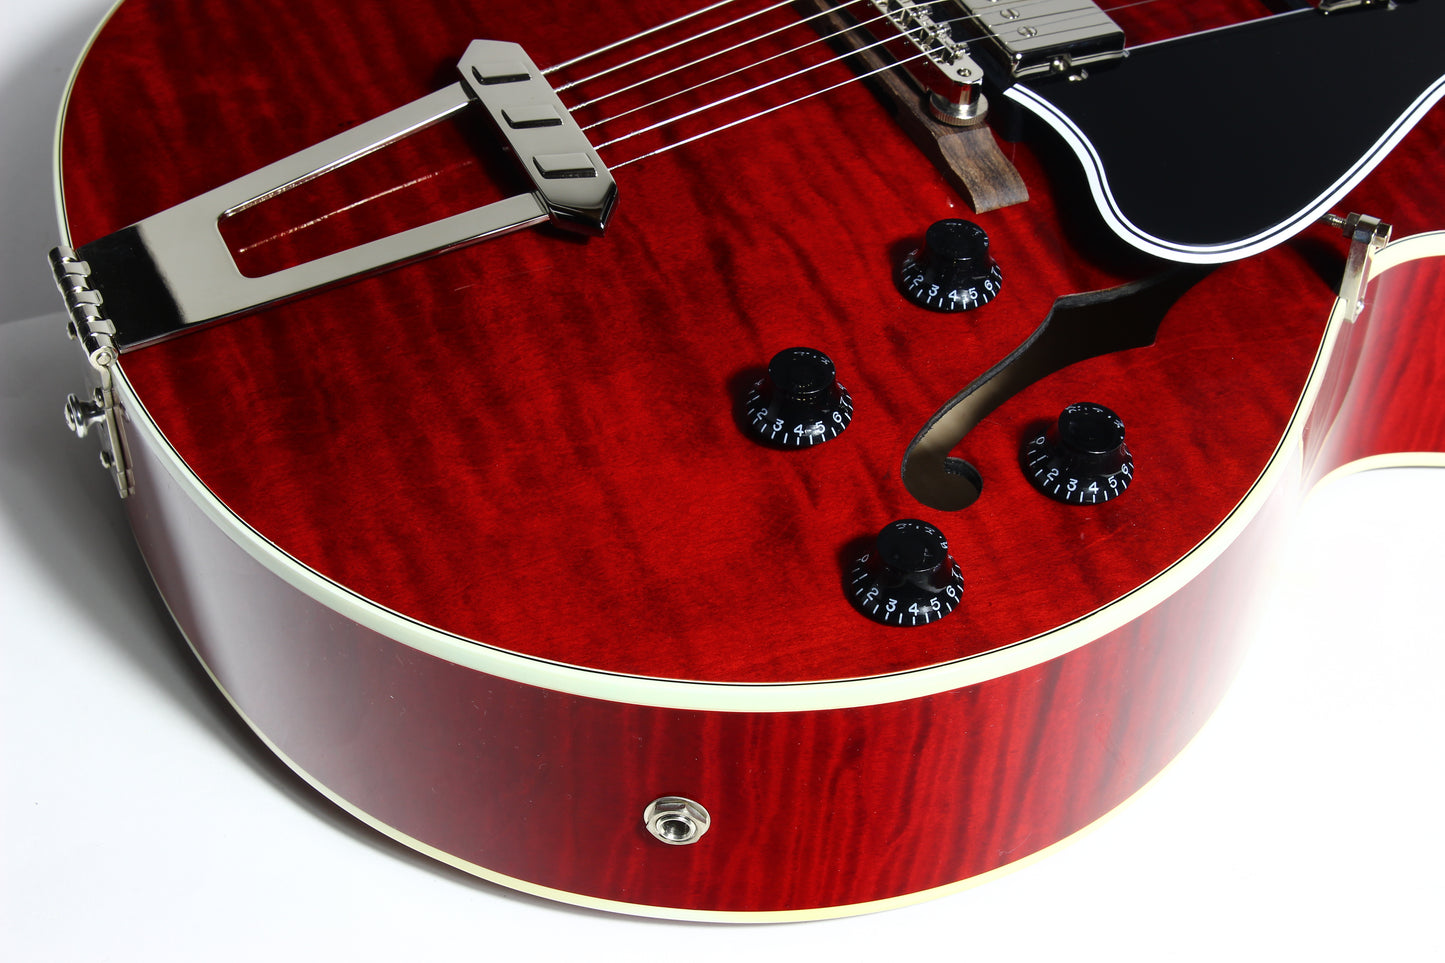 2011 Gibson Custom Shop Memphis ES-175 Wine Red Jazz Archtop Electric Guitar - Beautiful Figuring!